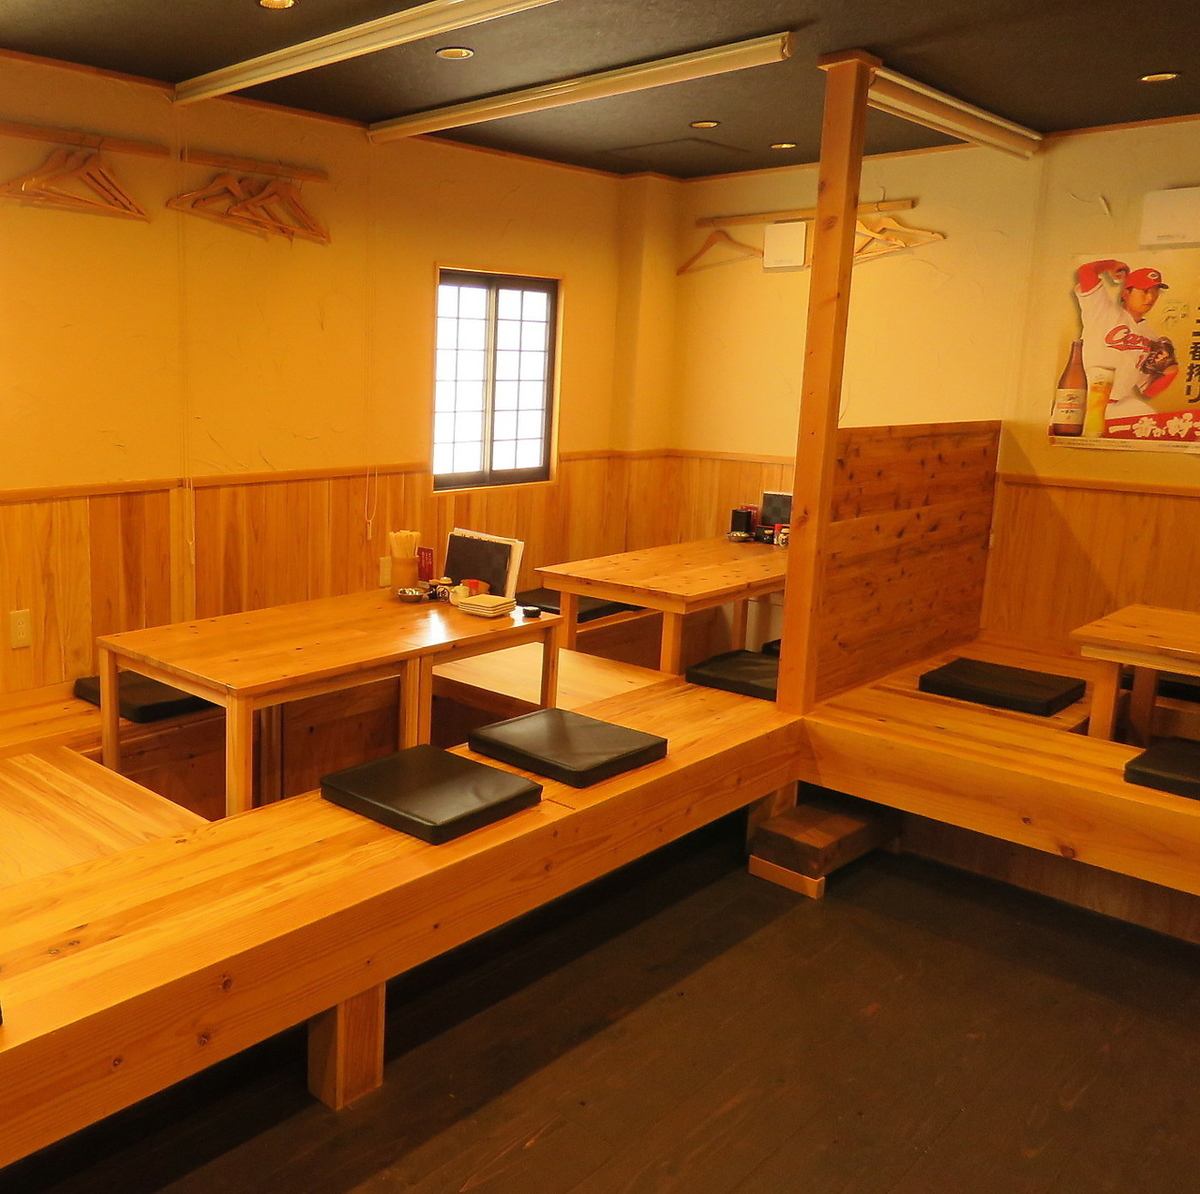 There are sunken kotatsu seats where you can relax and stretch your legs.